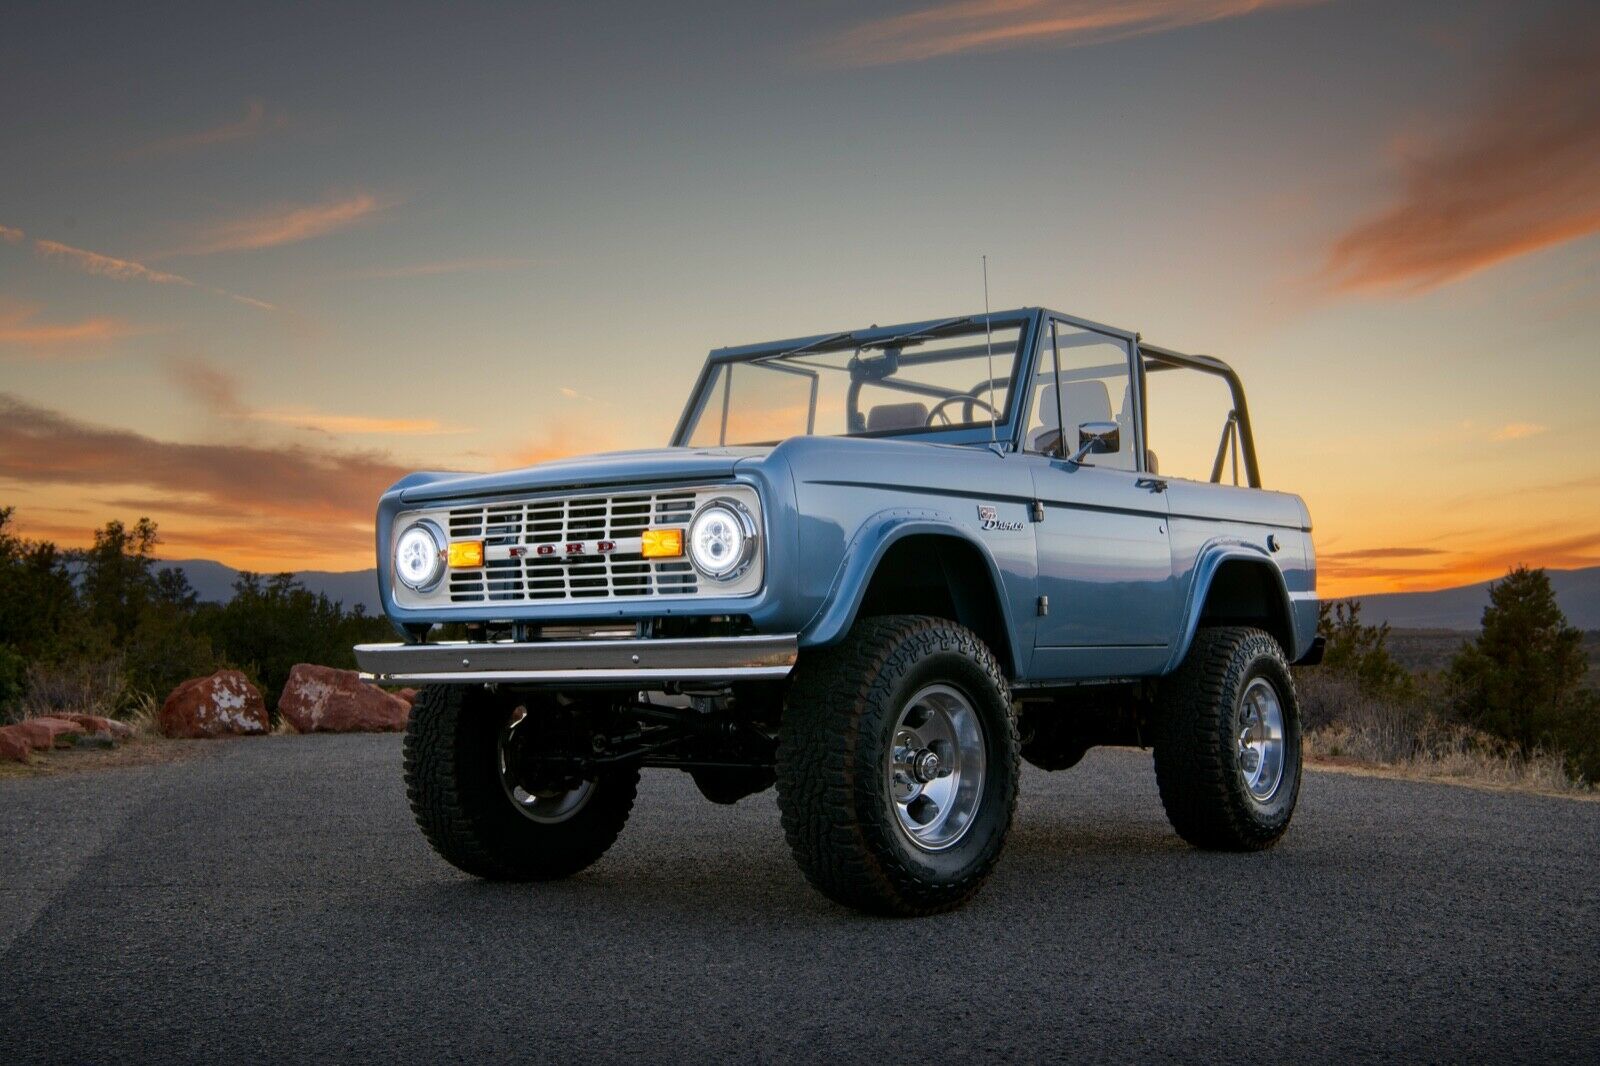 For Sale on eBay: A Pure Electric Ford Bronco Classsic | eBay Motors Blog